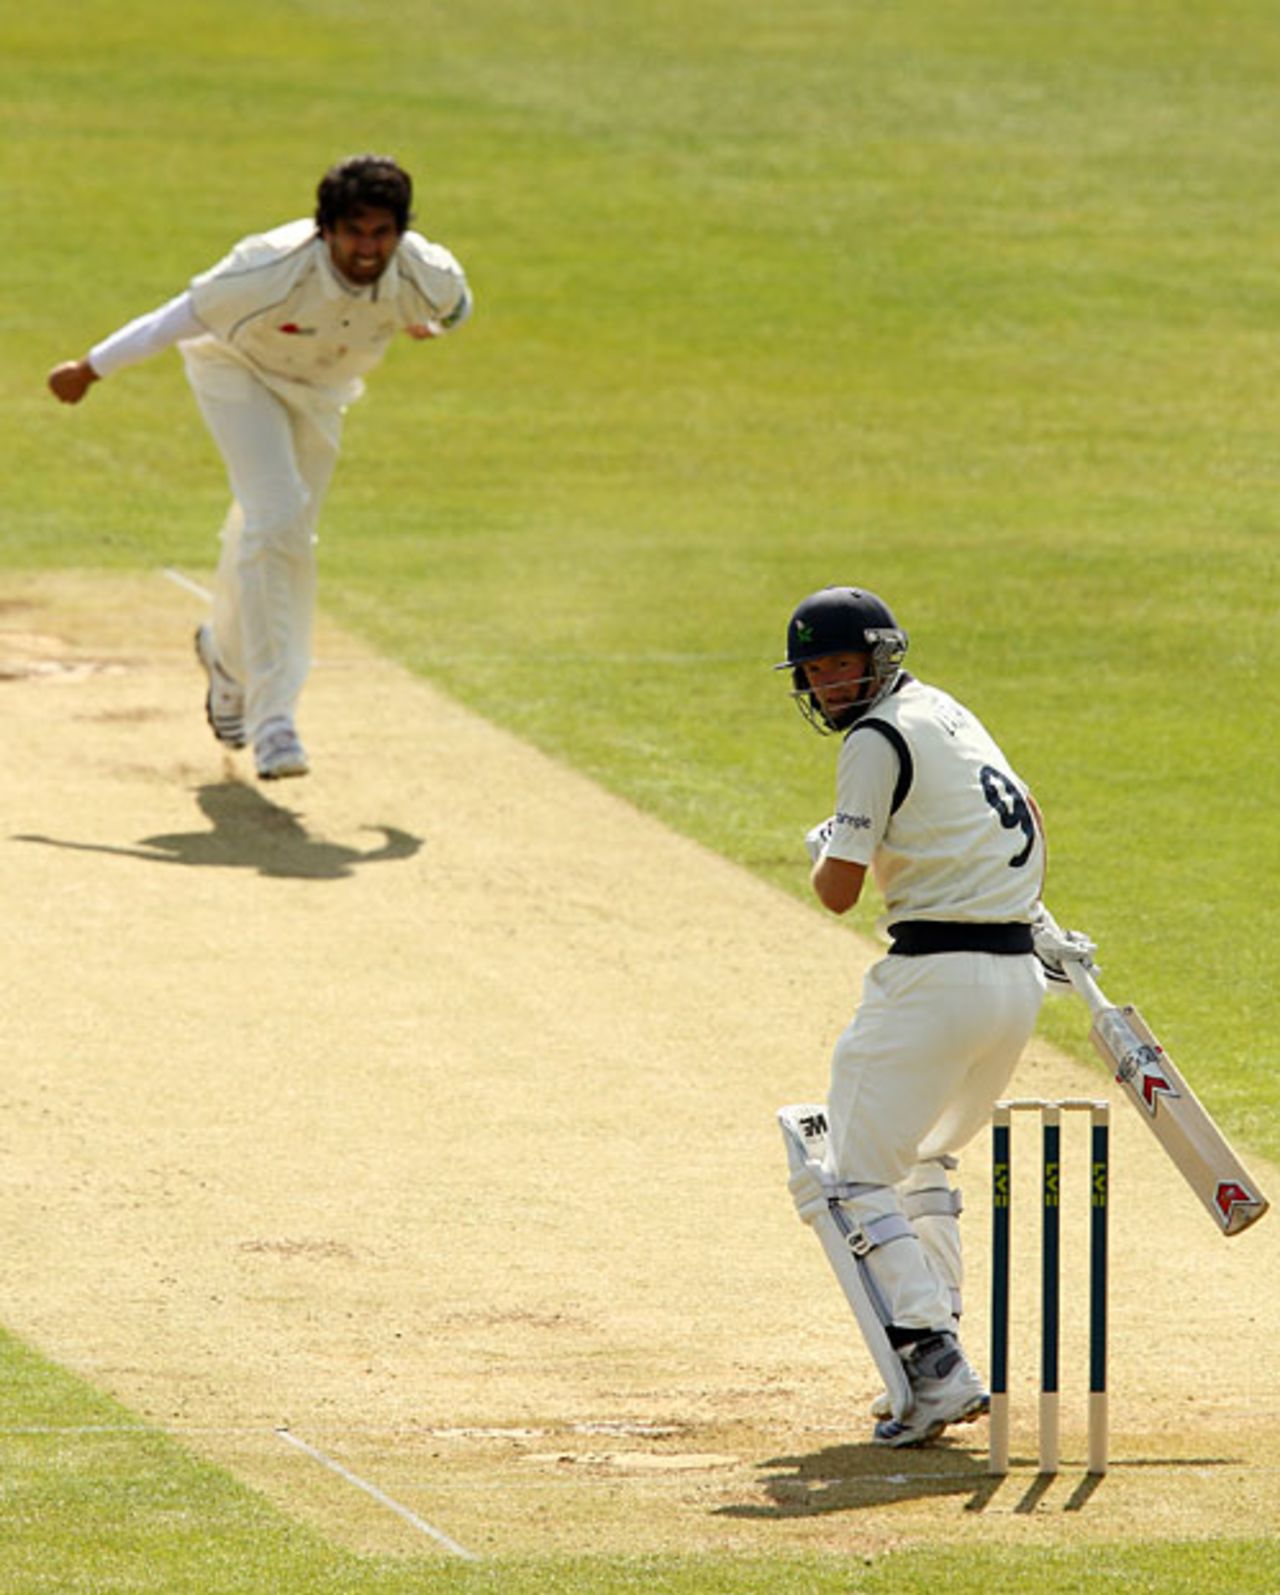 Amjad Khan snared Adam Lyth early as Yorkshire's top order stumbled, Kent v Yorkshire, County Championship, Division One, Canterbury, April 22, 2010